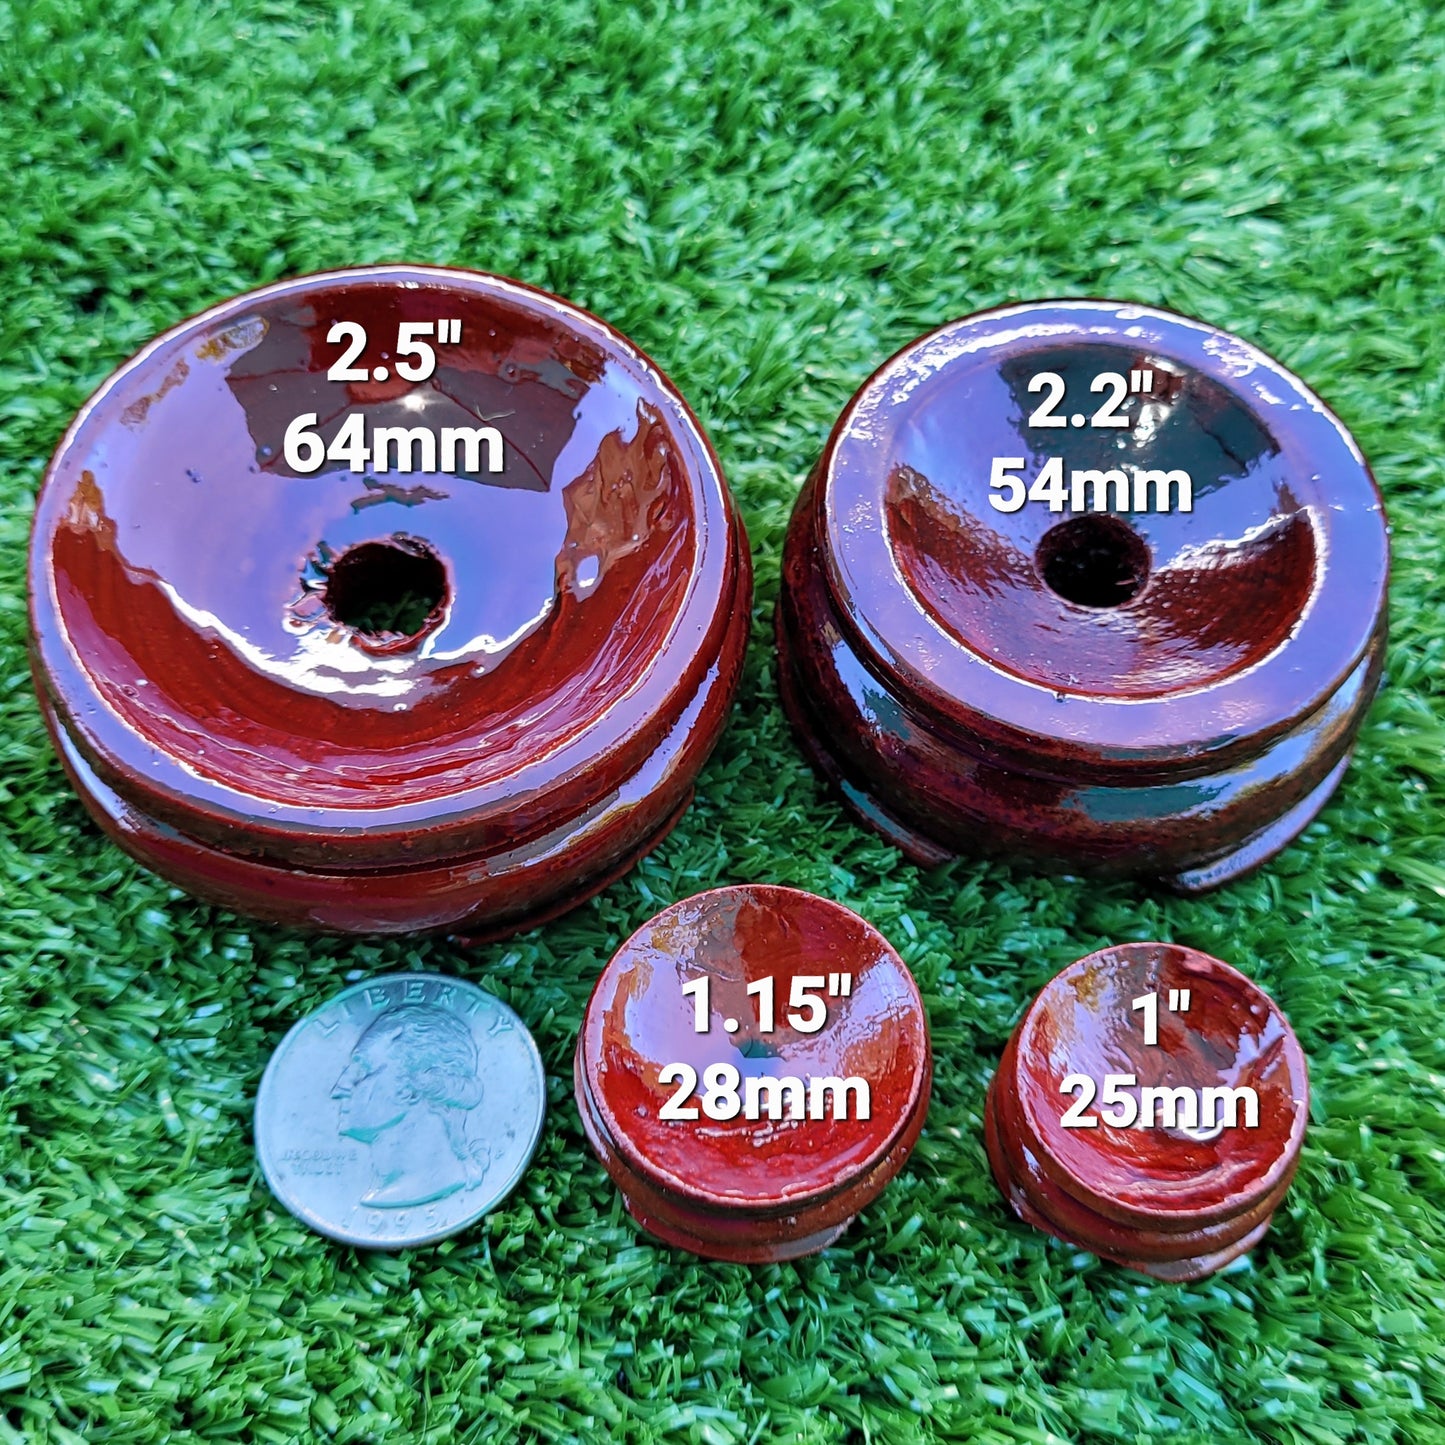 Wood Sphere Stands, Crystal Ball Holder, Display Stand for Spheres 1" to 7" (26mm to 178mm)